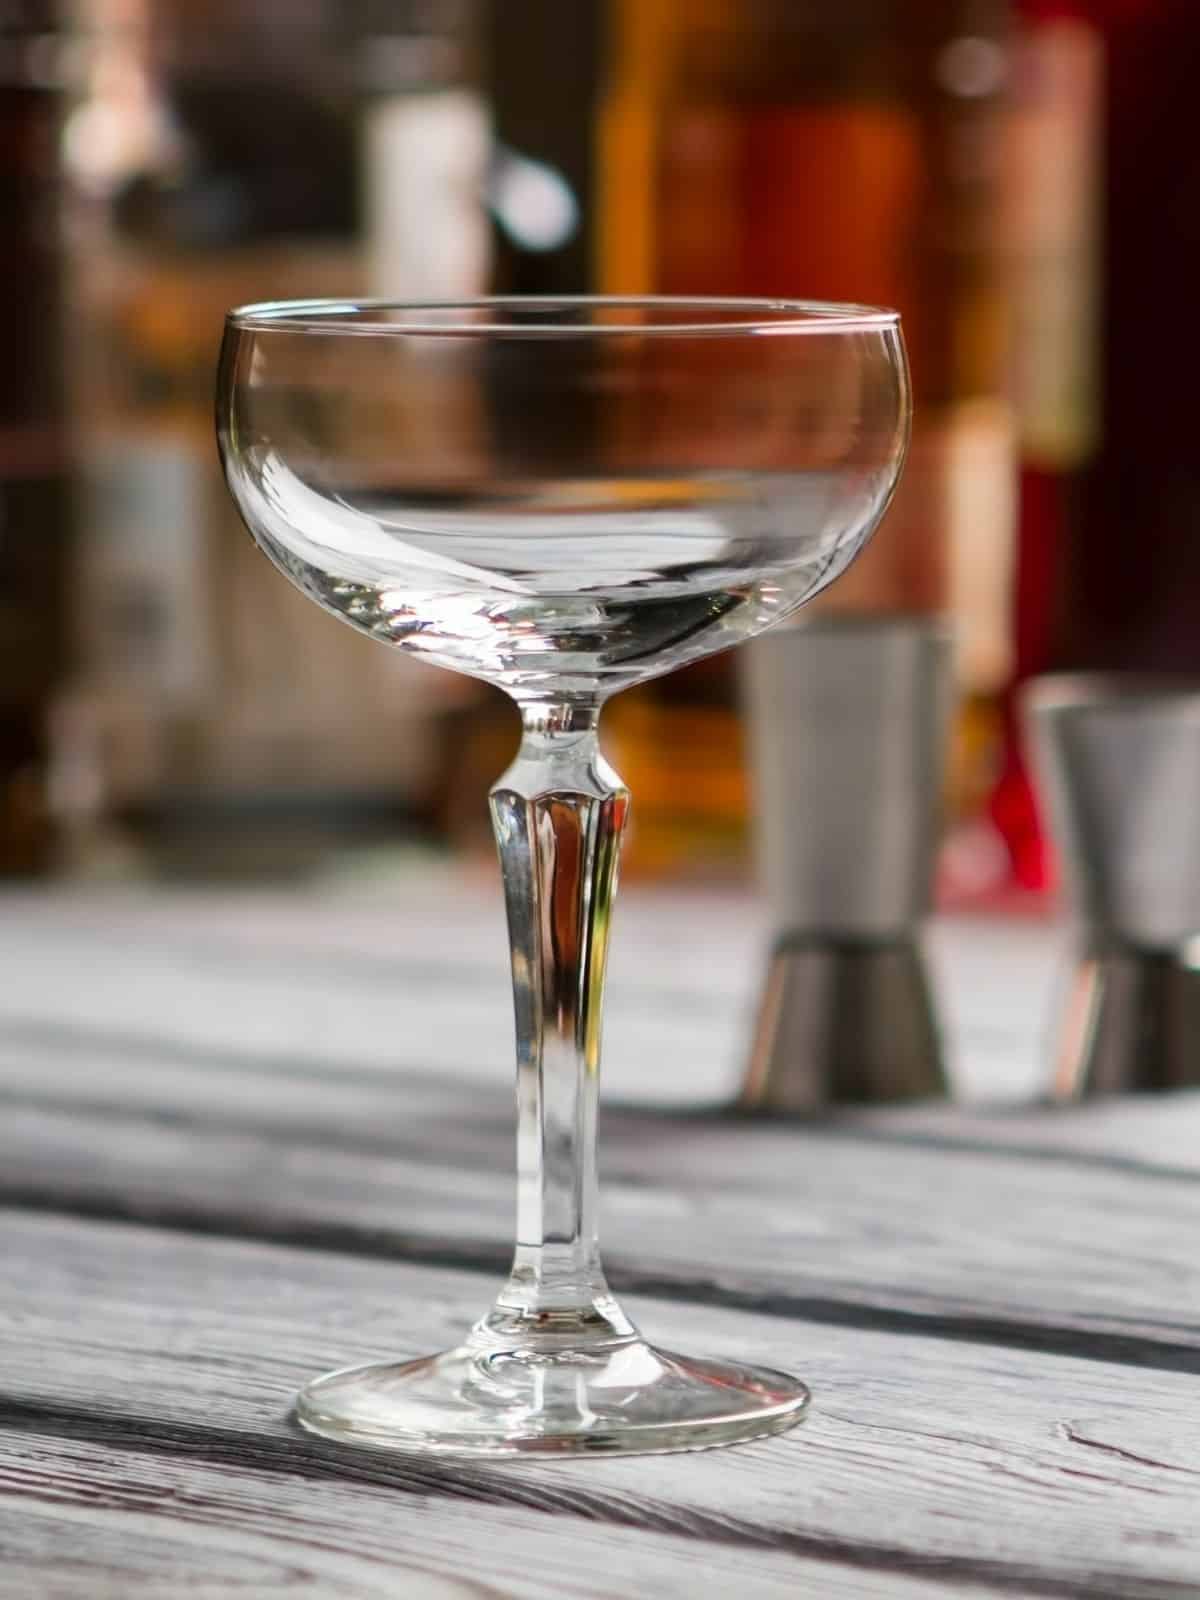 classic coupe glass used for champagne cocktails and daiquiri-style cocktails